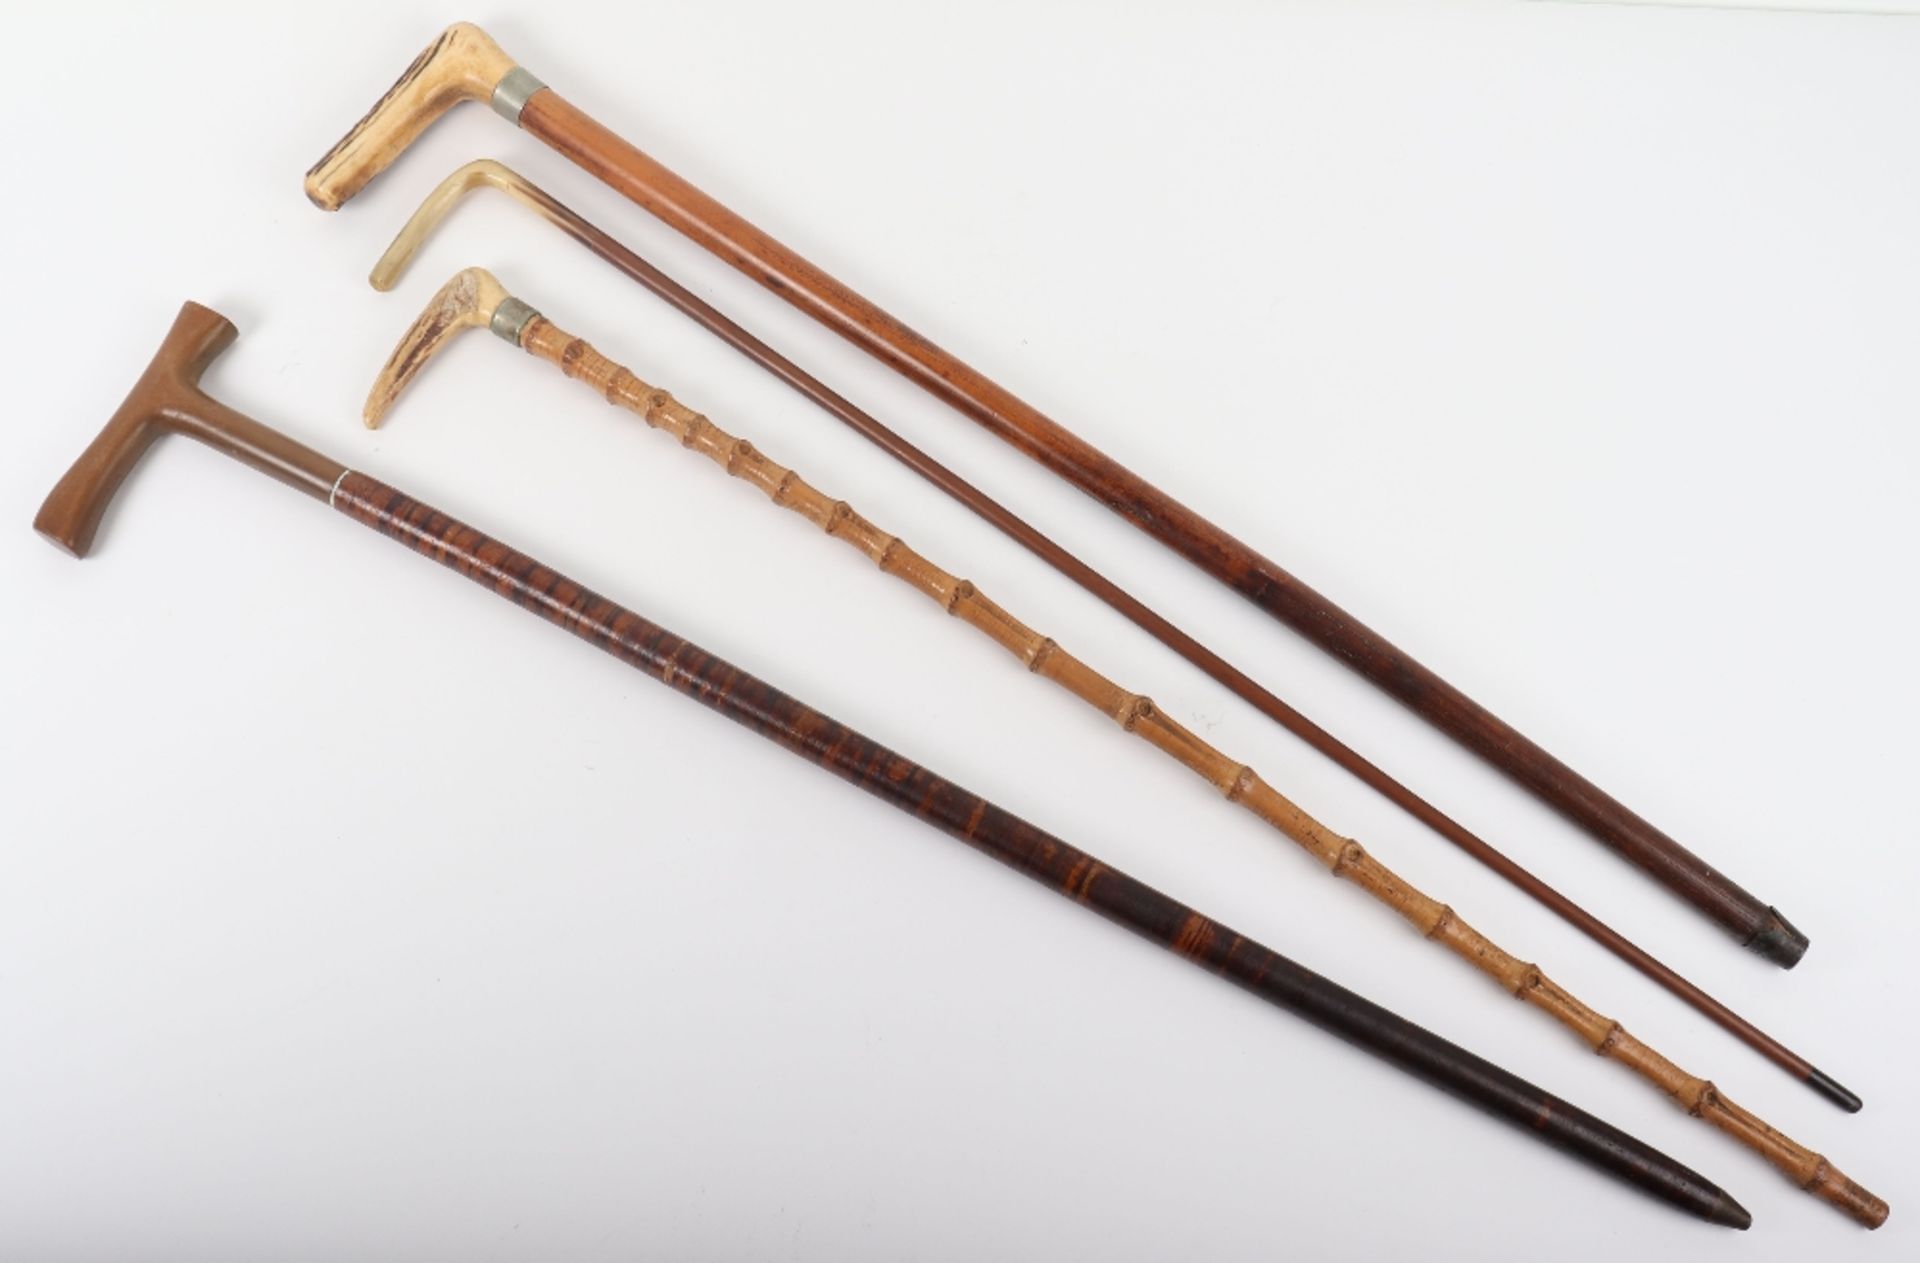 Two antler walking sticks, a horn handle stick and one other